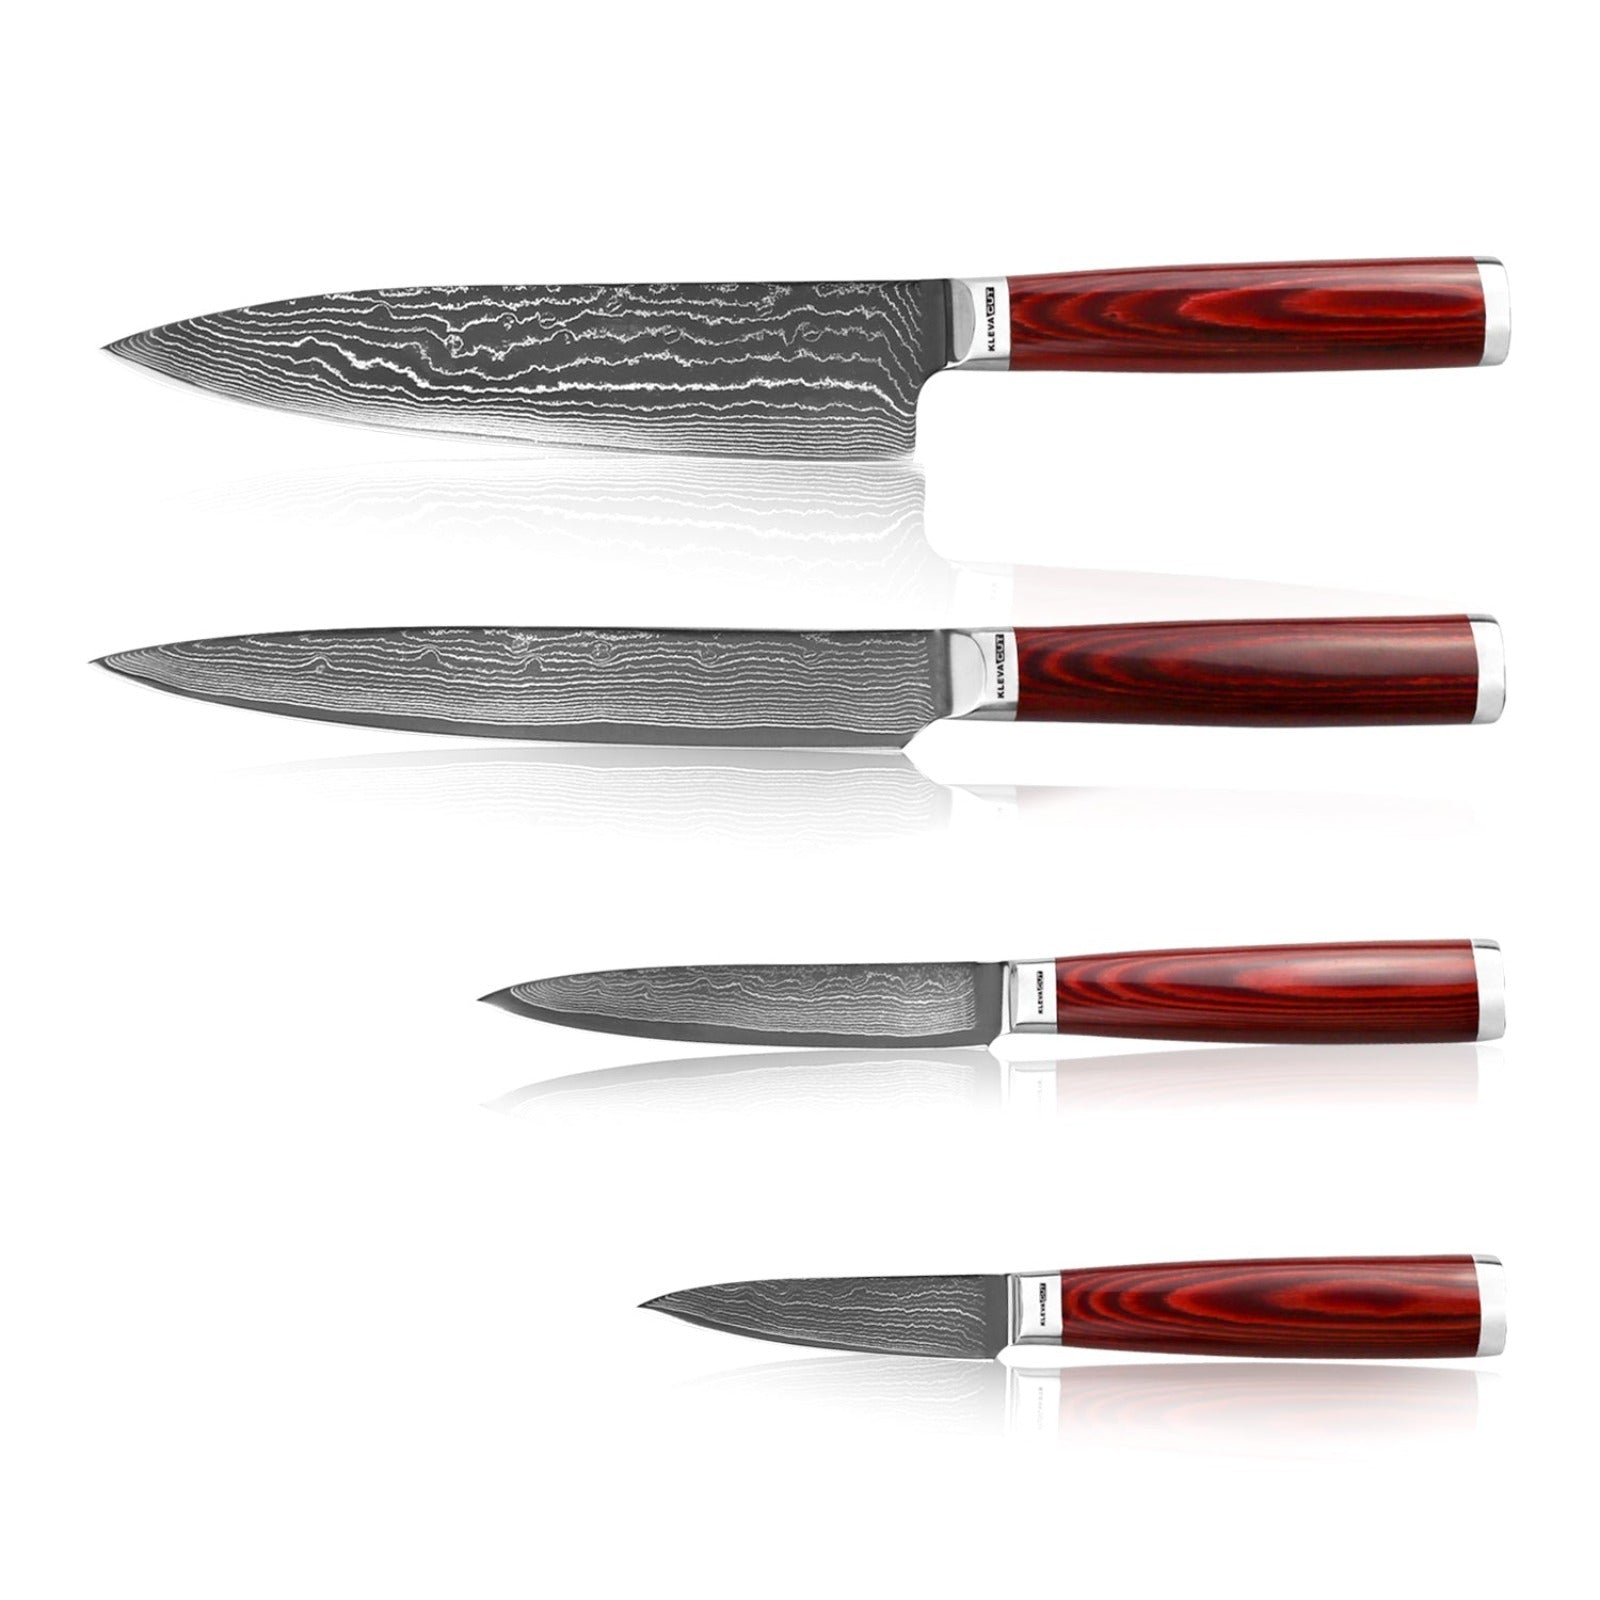 KLEVA® 67 Layer Genuine Damascus Steel 4pc Chef Knife Set in Bamboo Gift Case  Bunnings Marketplace   